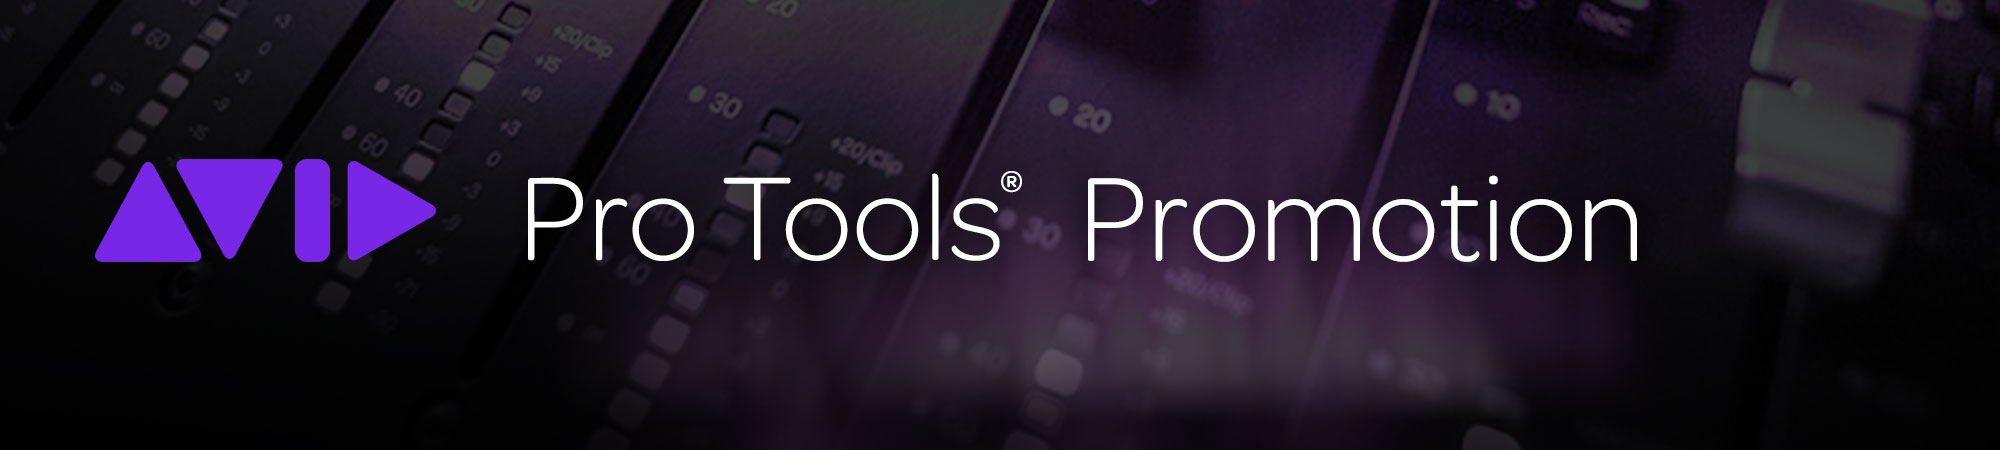 Pro Tools Promotion Banner